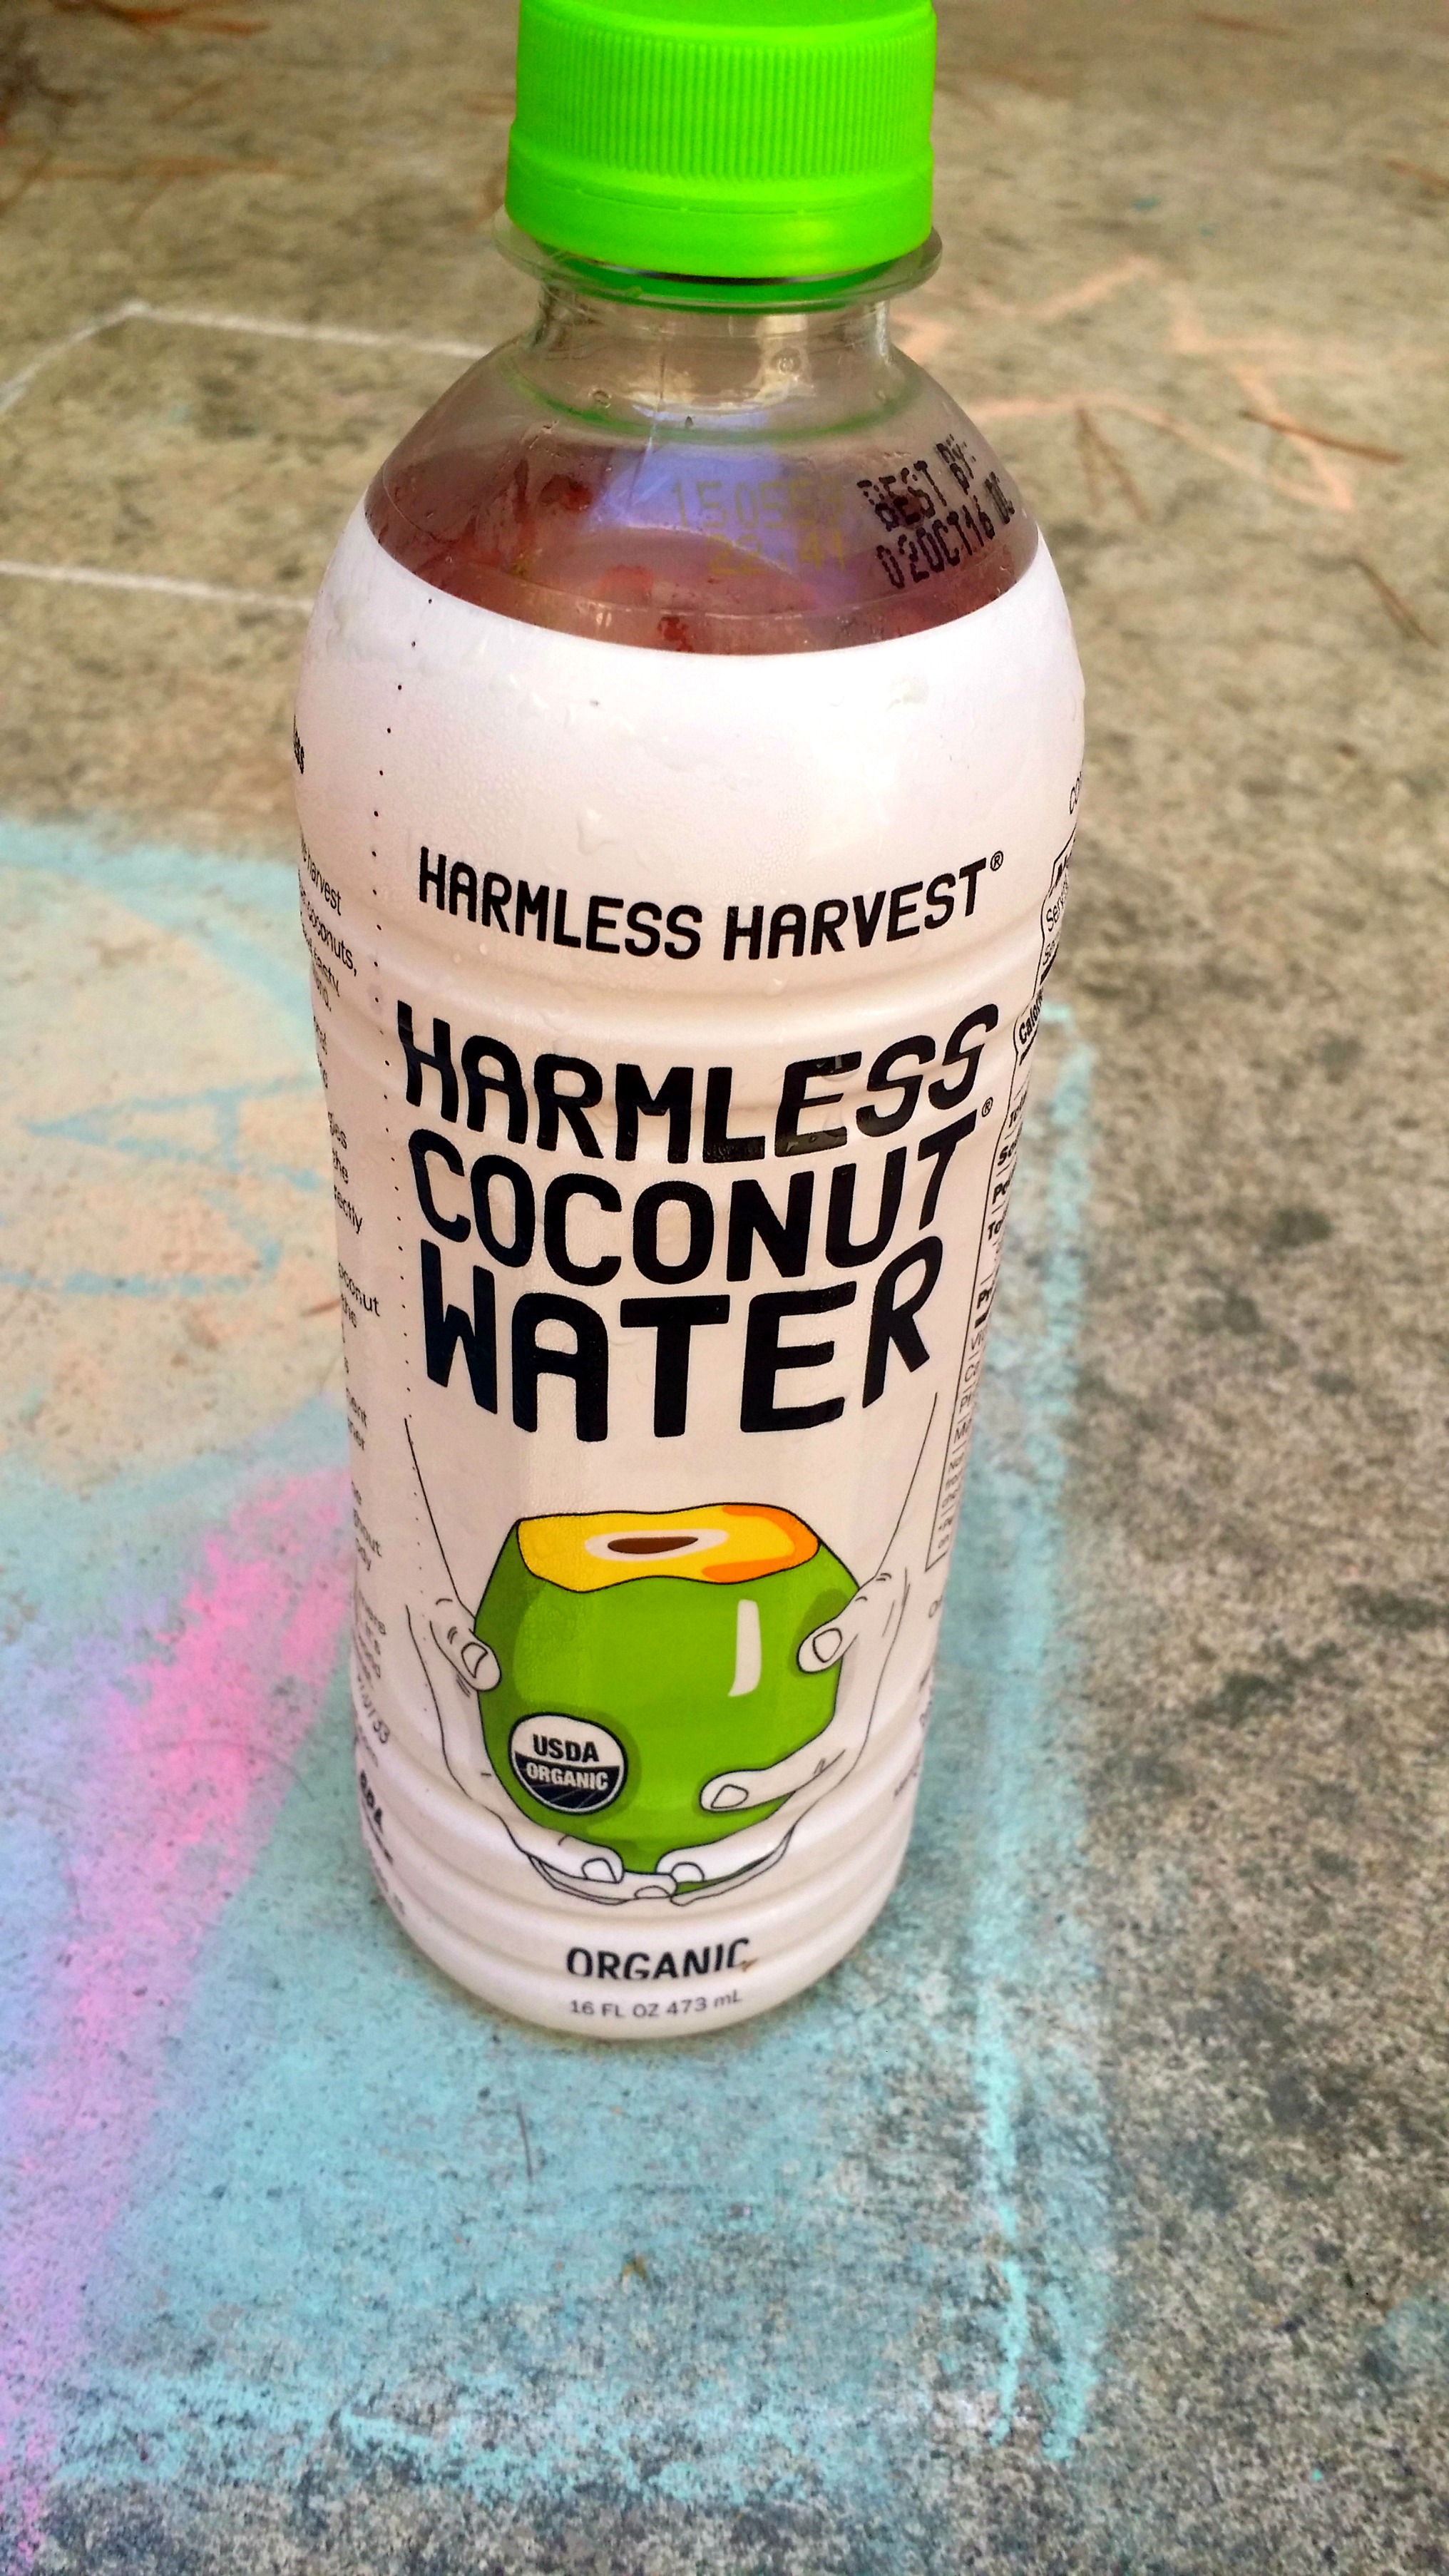 BTS Day 1 USE harmless coconut water